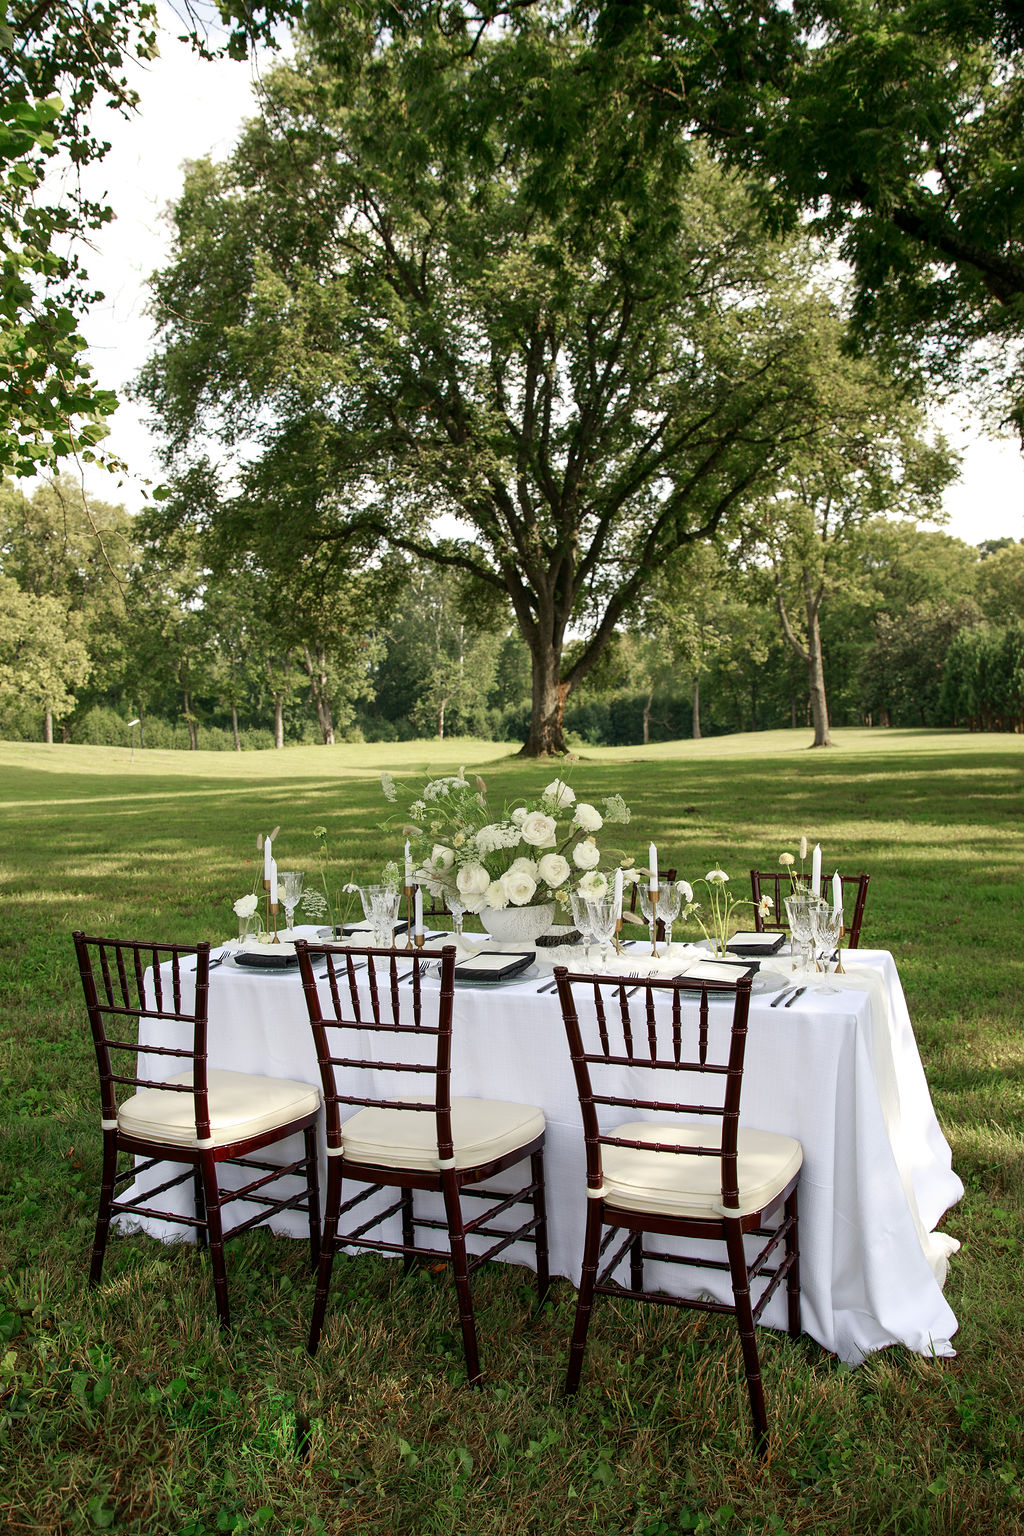 A table for six sits in a grassy field with a large white flower centerpiece